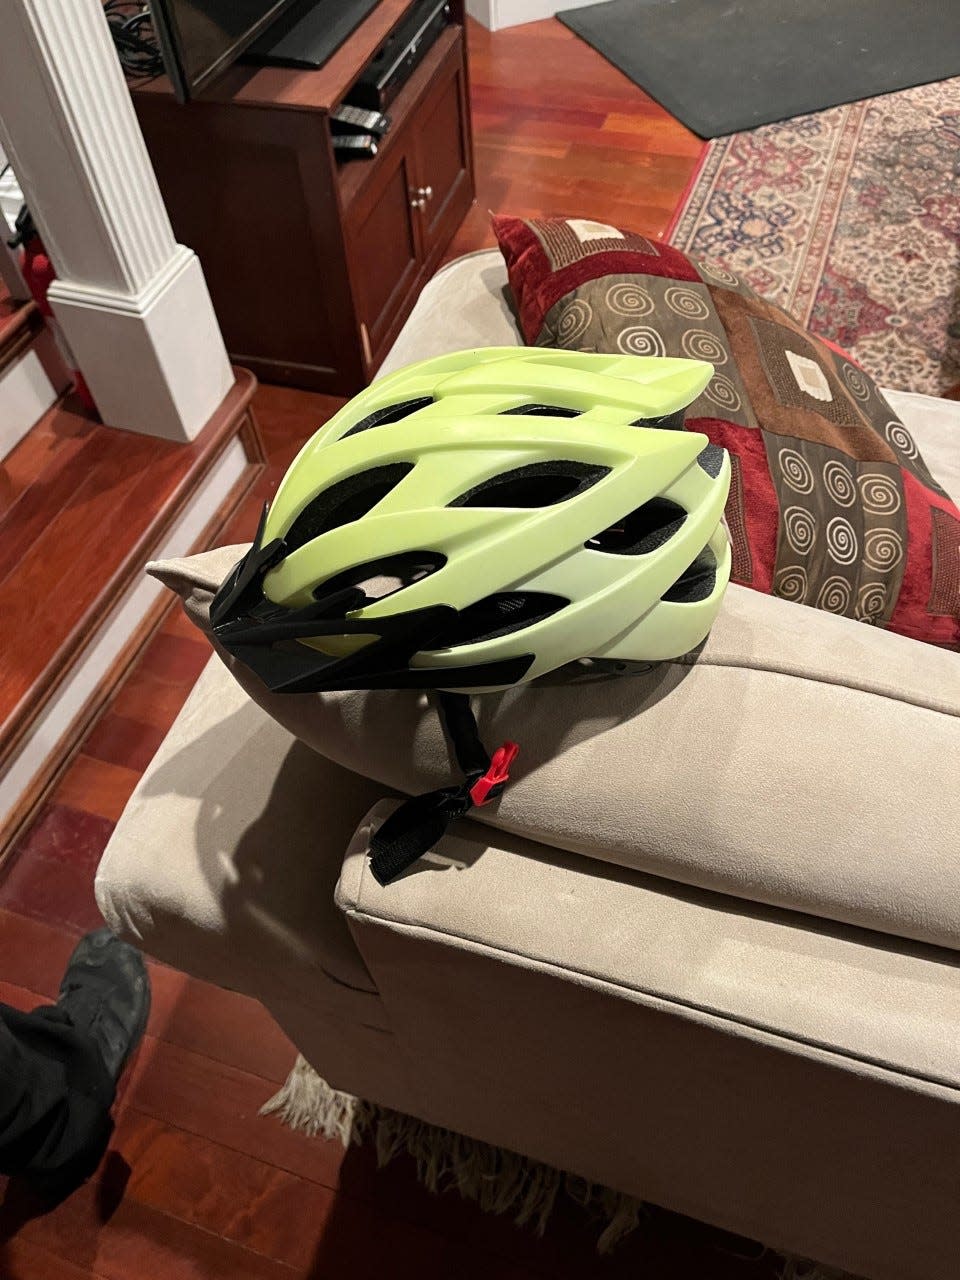 This is a photo of the bike helmet that Daniel Cambrourelis-Haskins, 19, was last seen wearing. He has been missing since Monday evening.